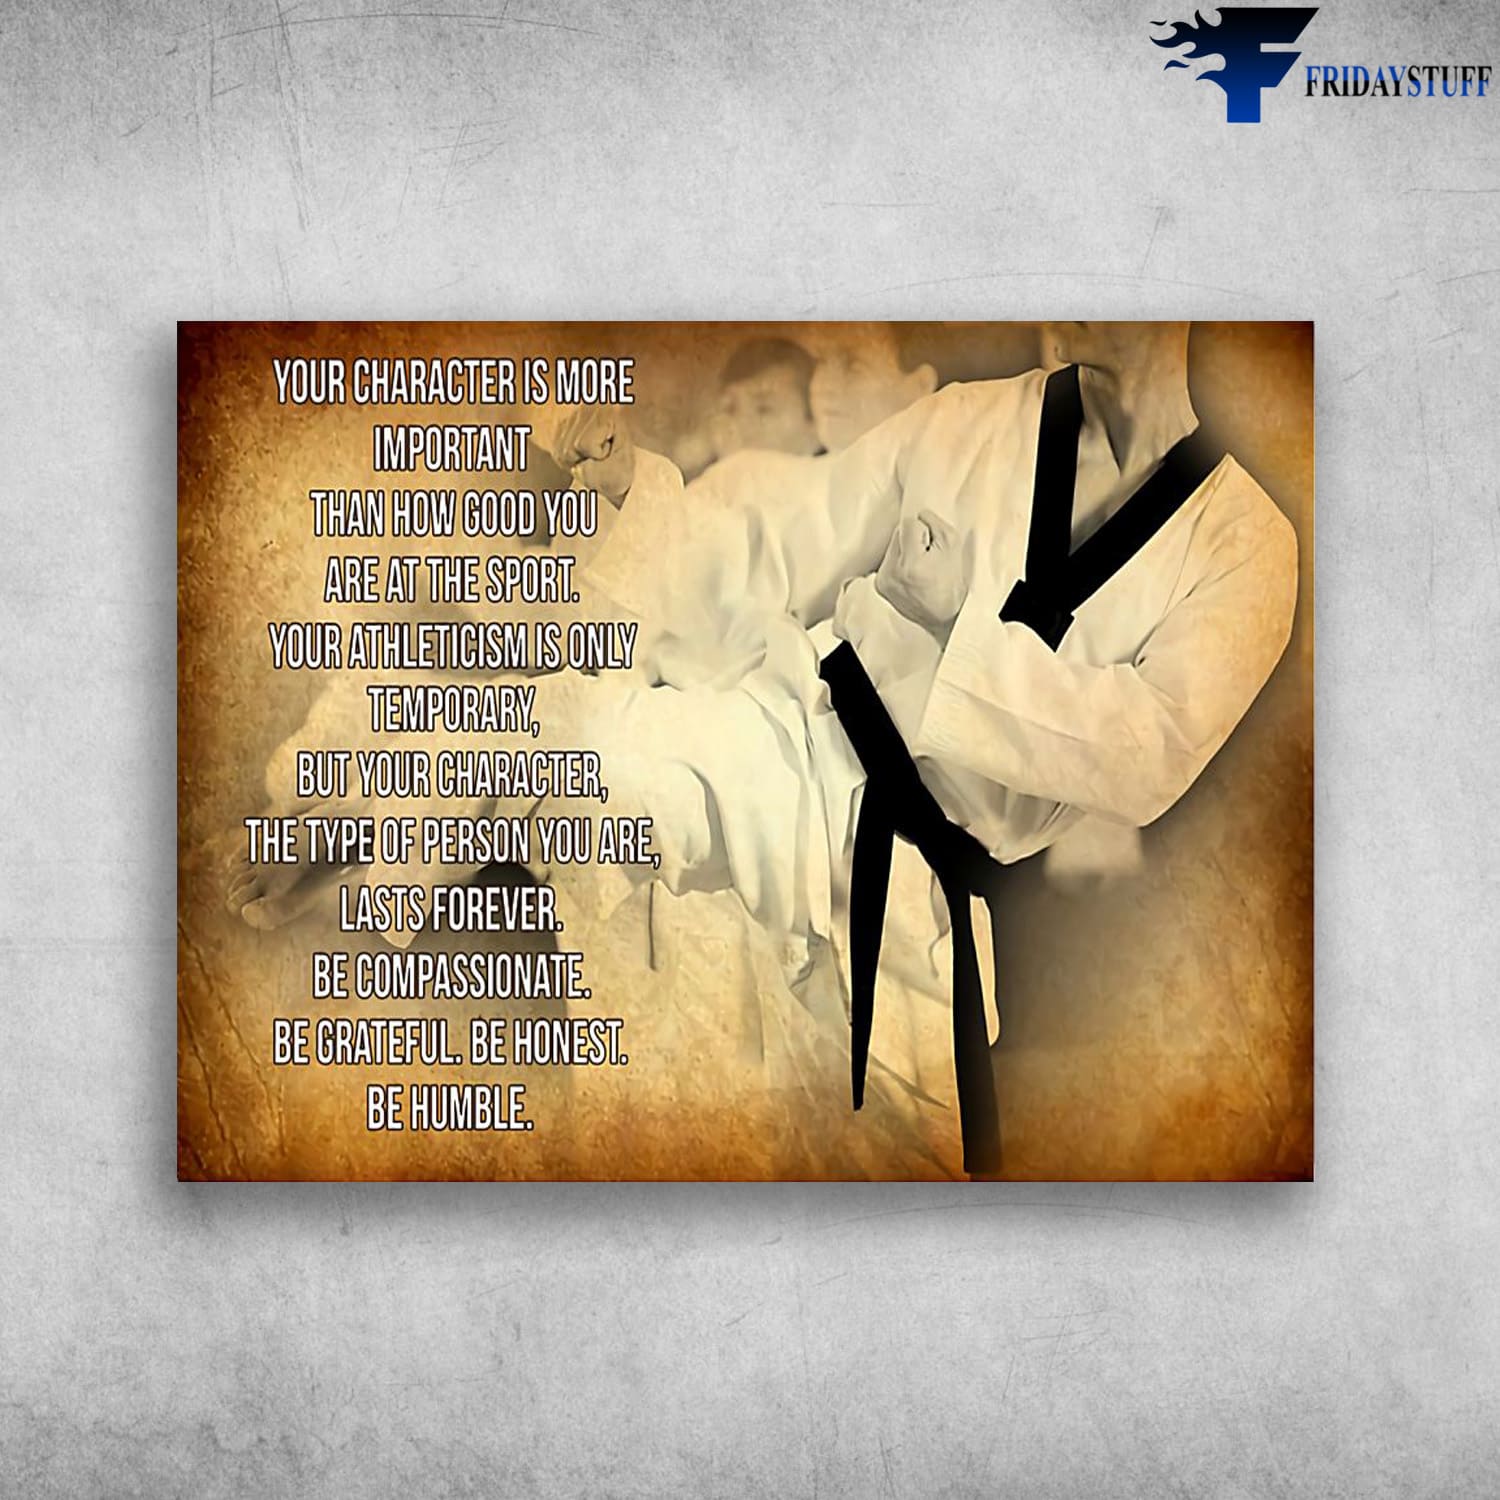 Taekwondo Poster, Taekwondo Lover, Your Character Is More Important, Than How Good You Are The Sport, Your Athleticism Only Temporary, But Your Character, The Types Of Person You Are